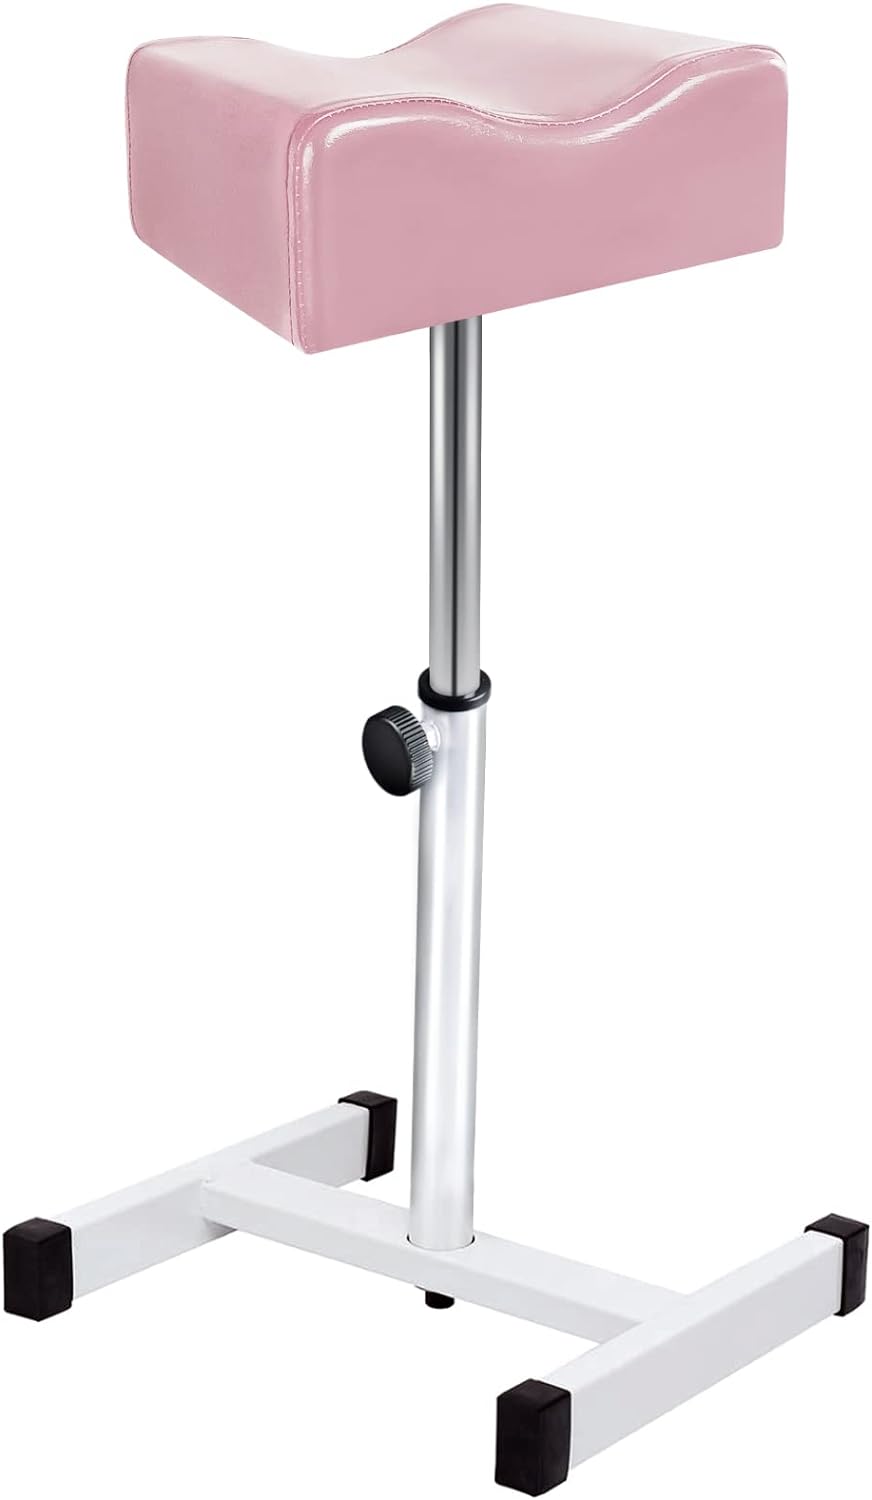 18-26 Inch Adjustable Pedicure Nail Footrest - Soft Manicure Stool for Salon & Home Selfcare